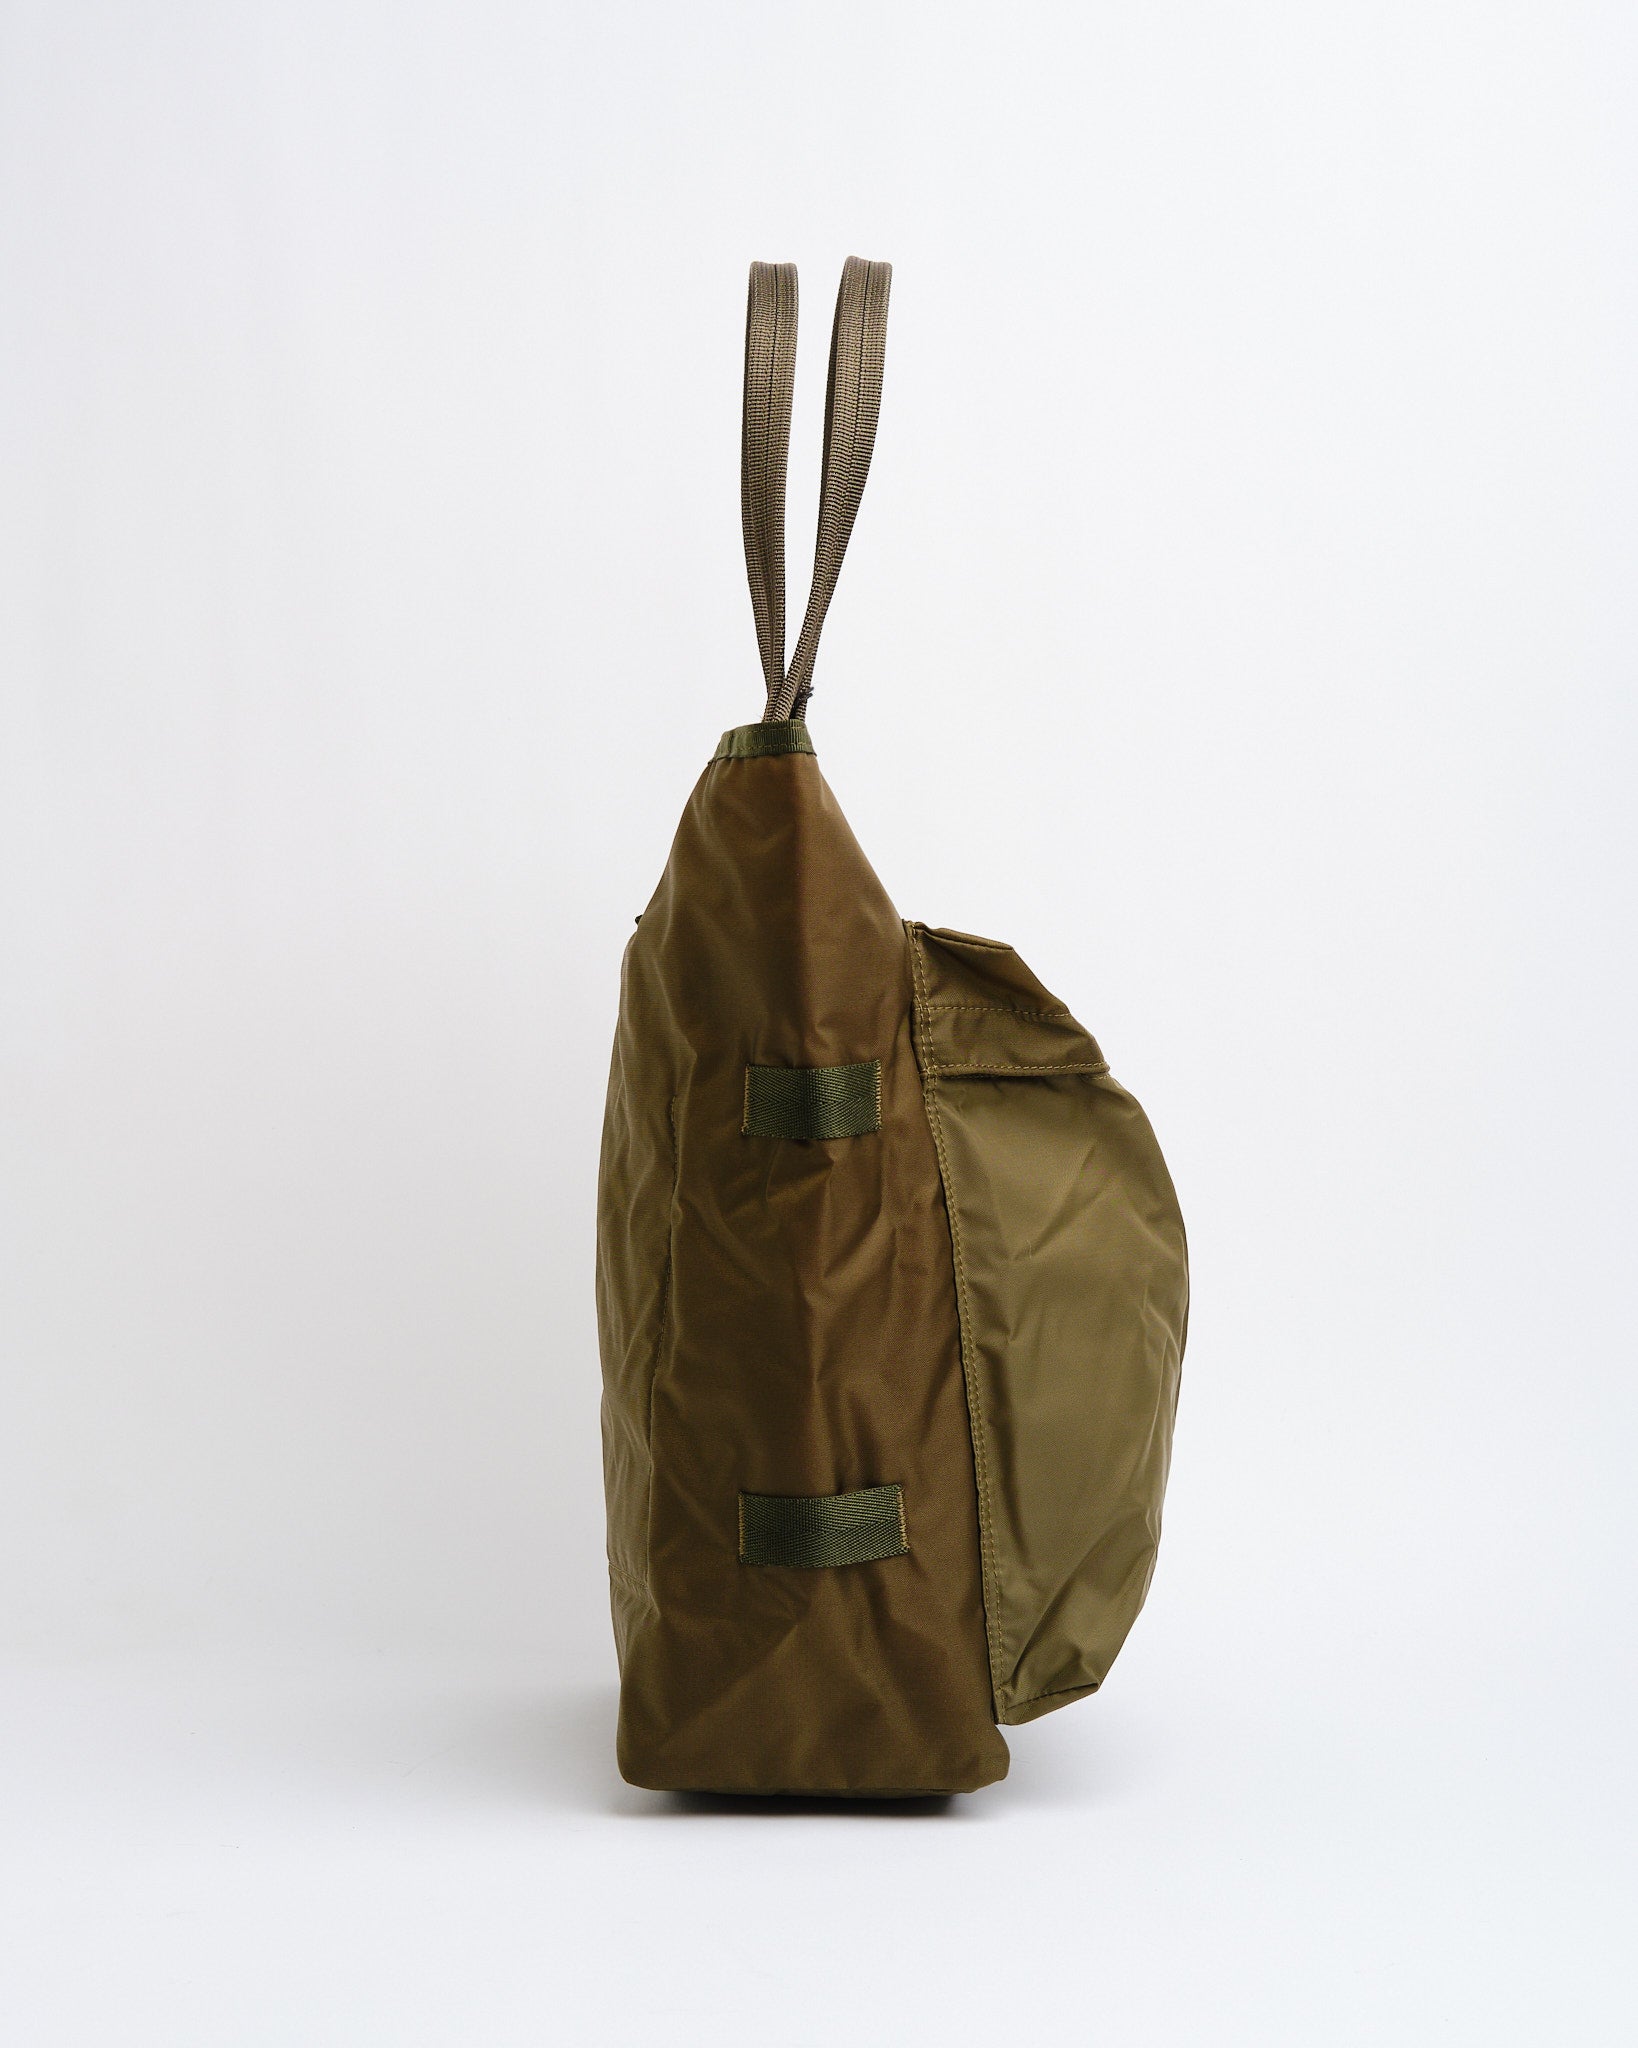 PORTER FORCE TOTE BAG OLIVE DRAB - Meadow